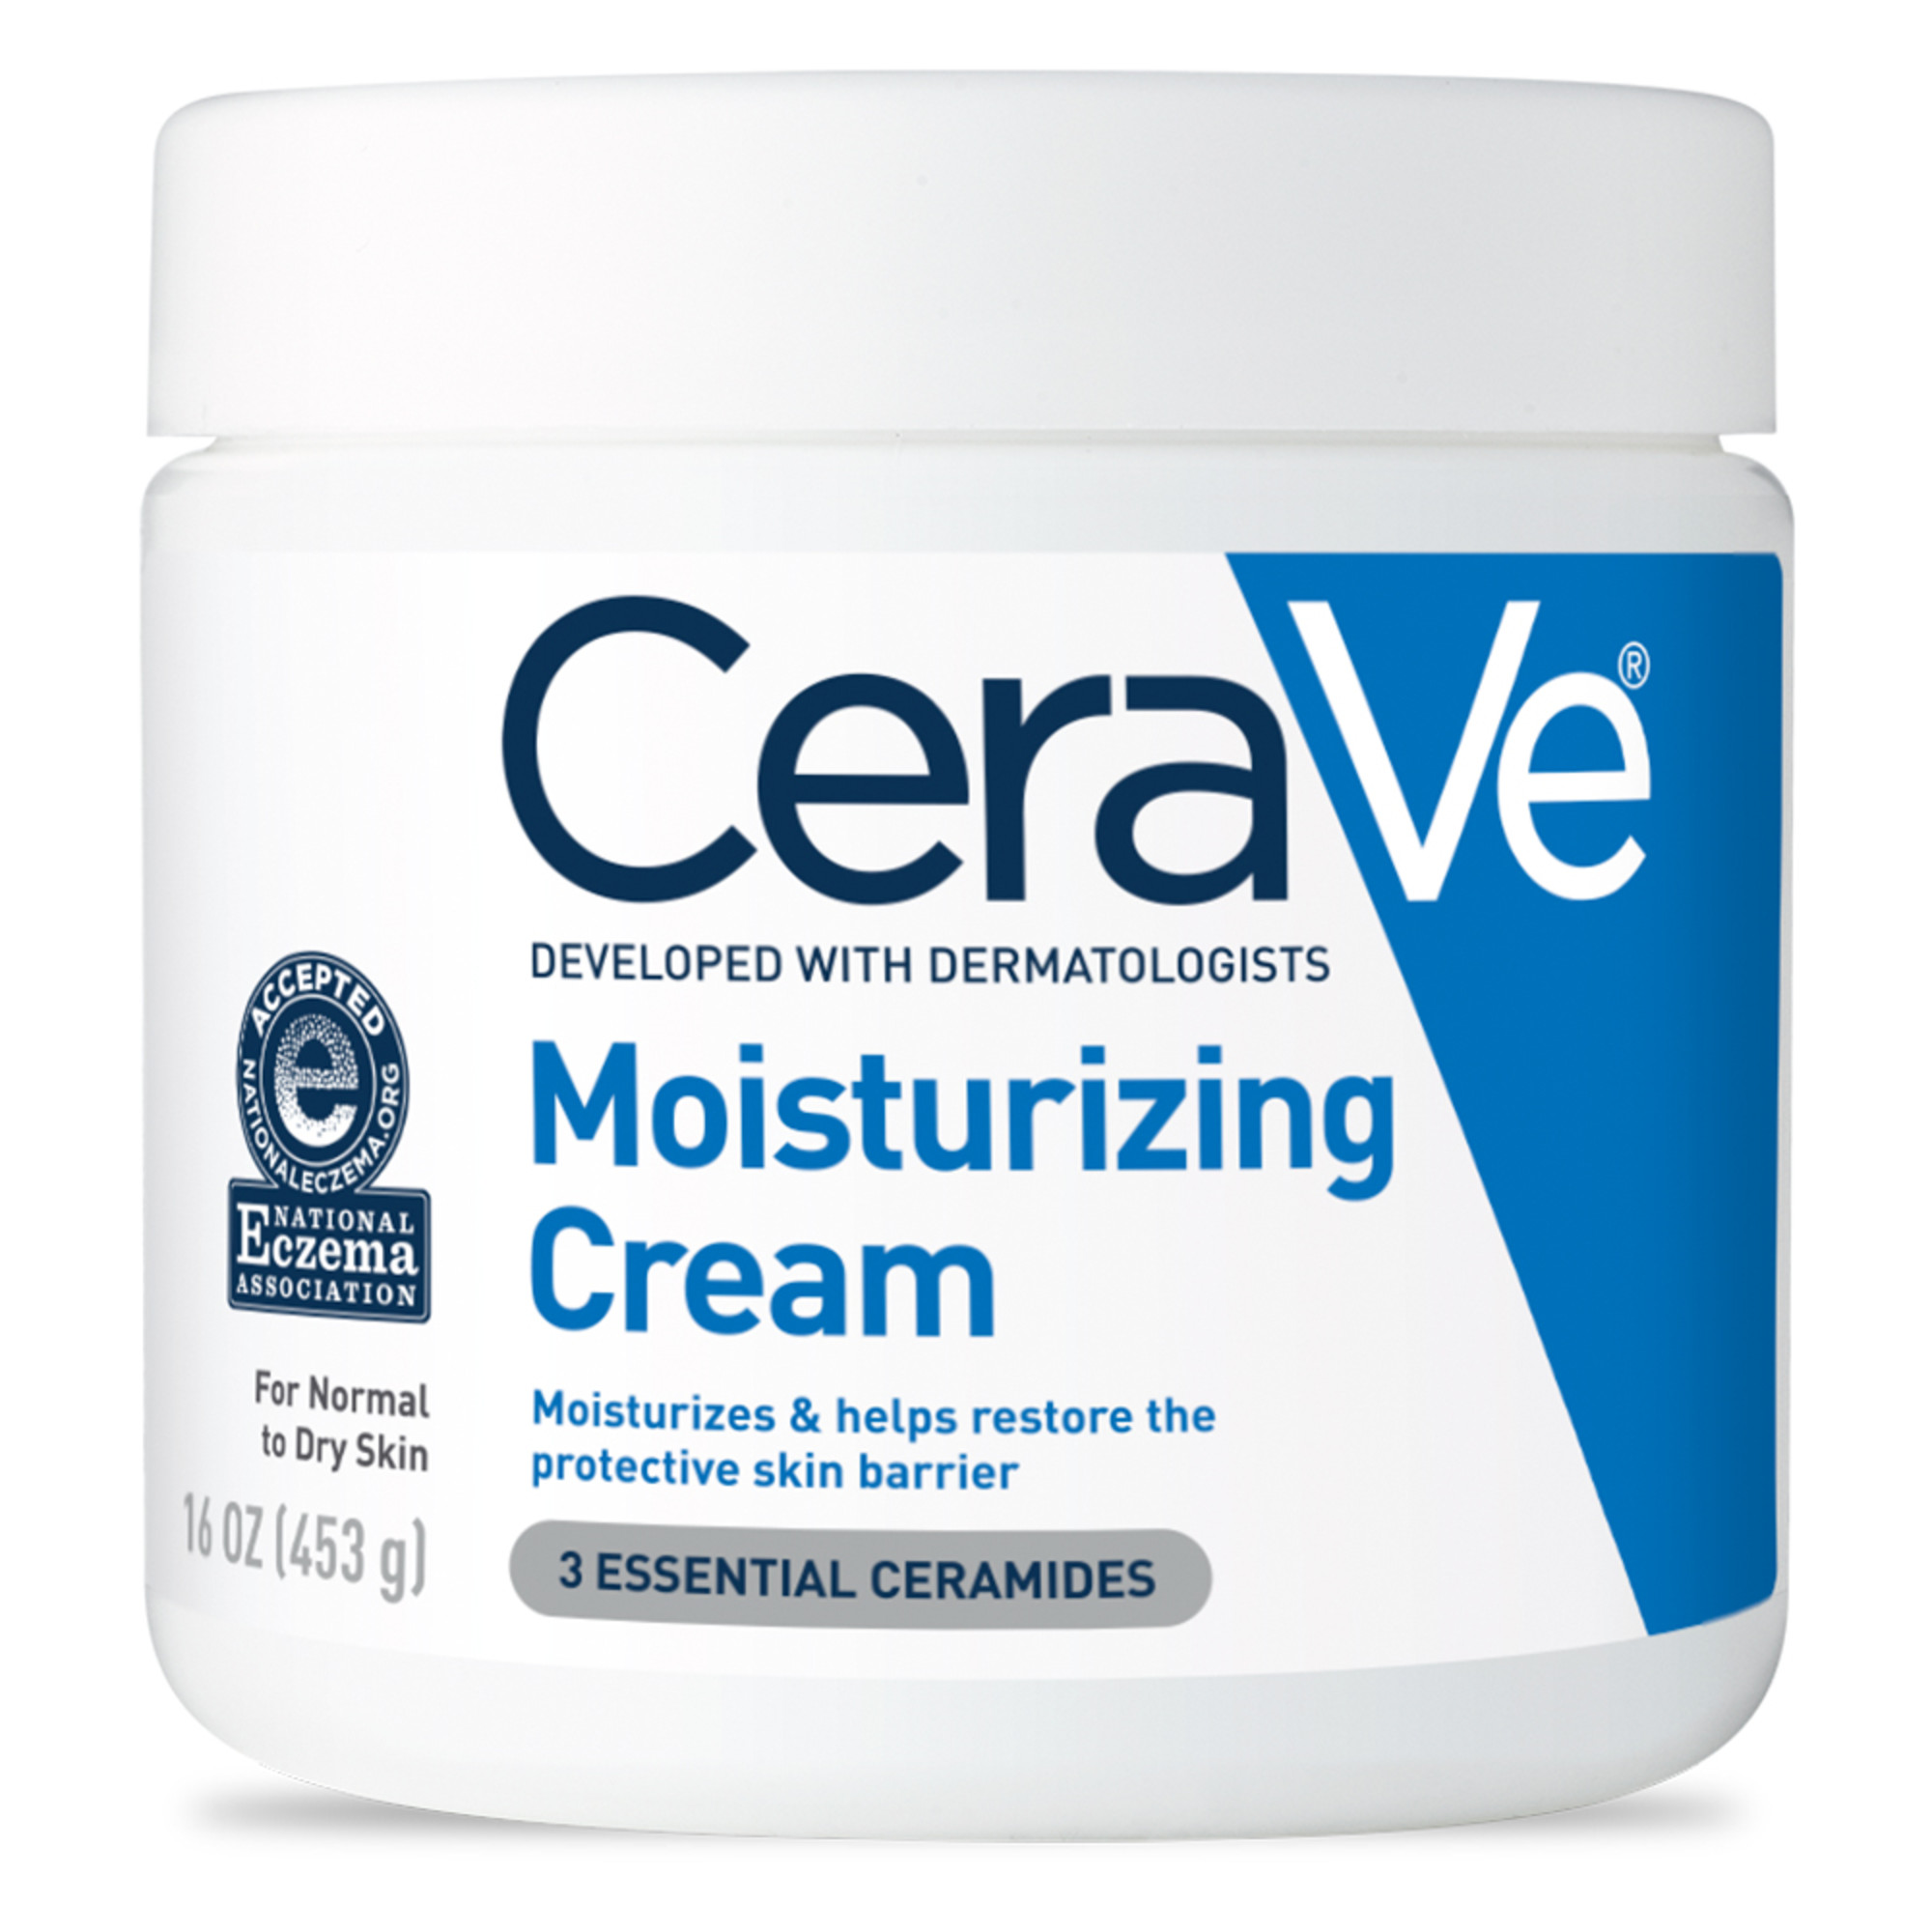 CeraVe Moisturizing Cream, Face & Body Moisturizer for Normal to Very Dry Skin, 16 oz - image 14 of 14